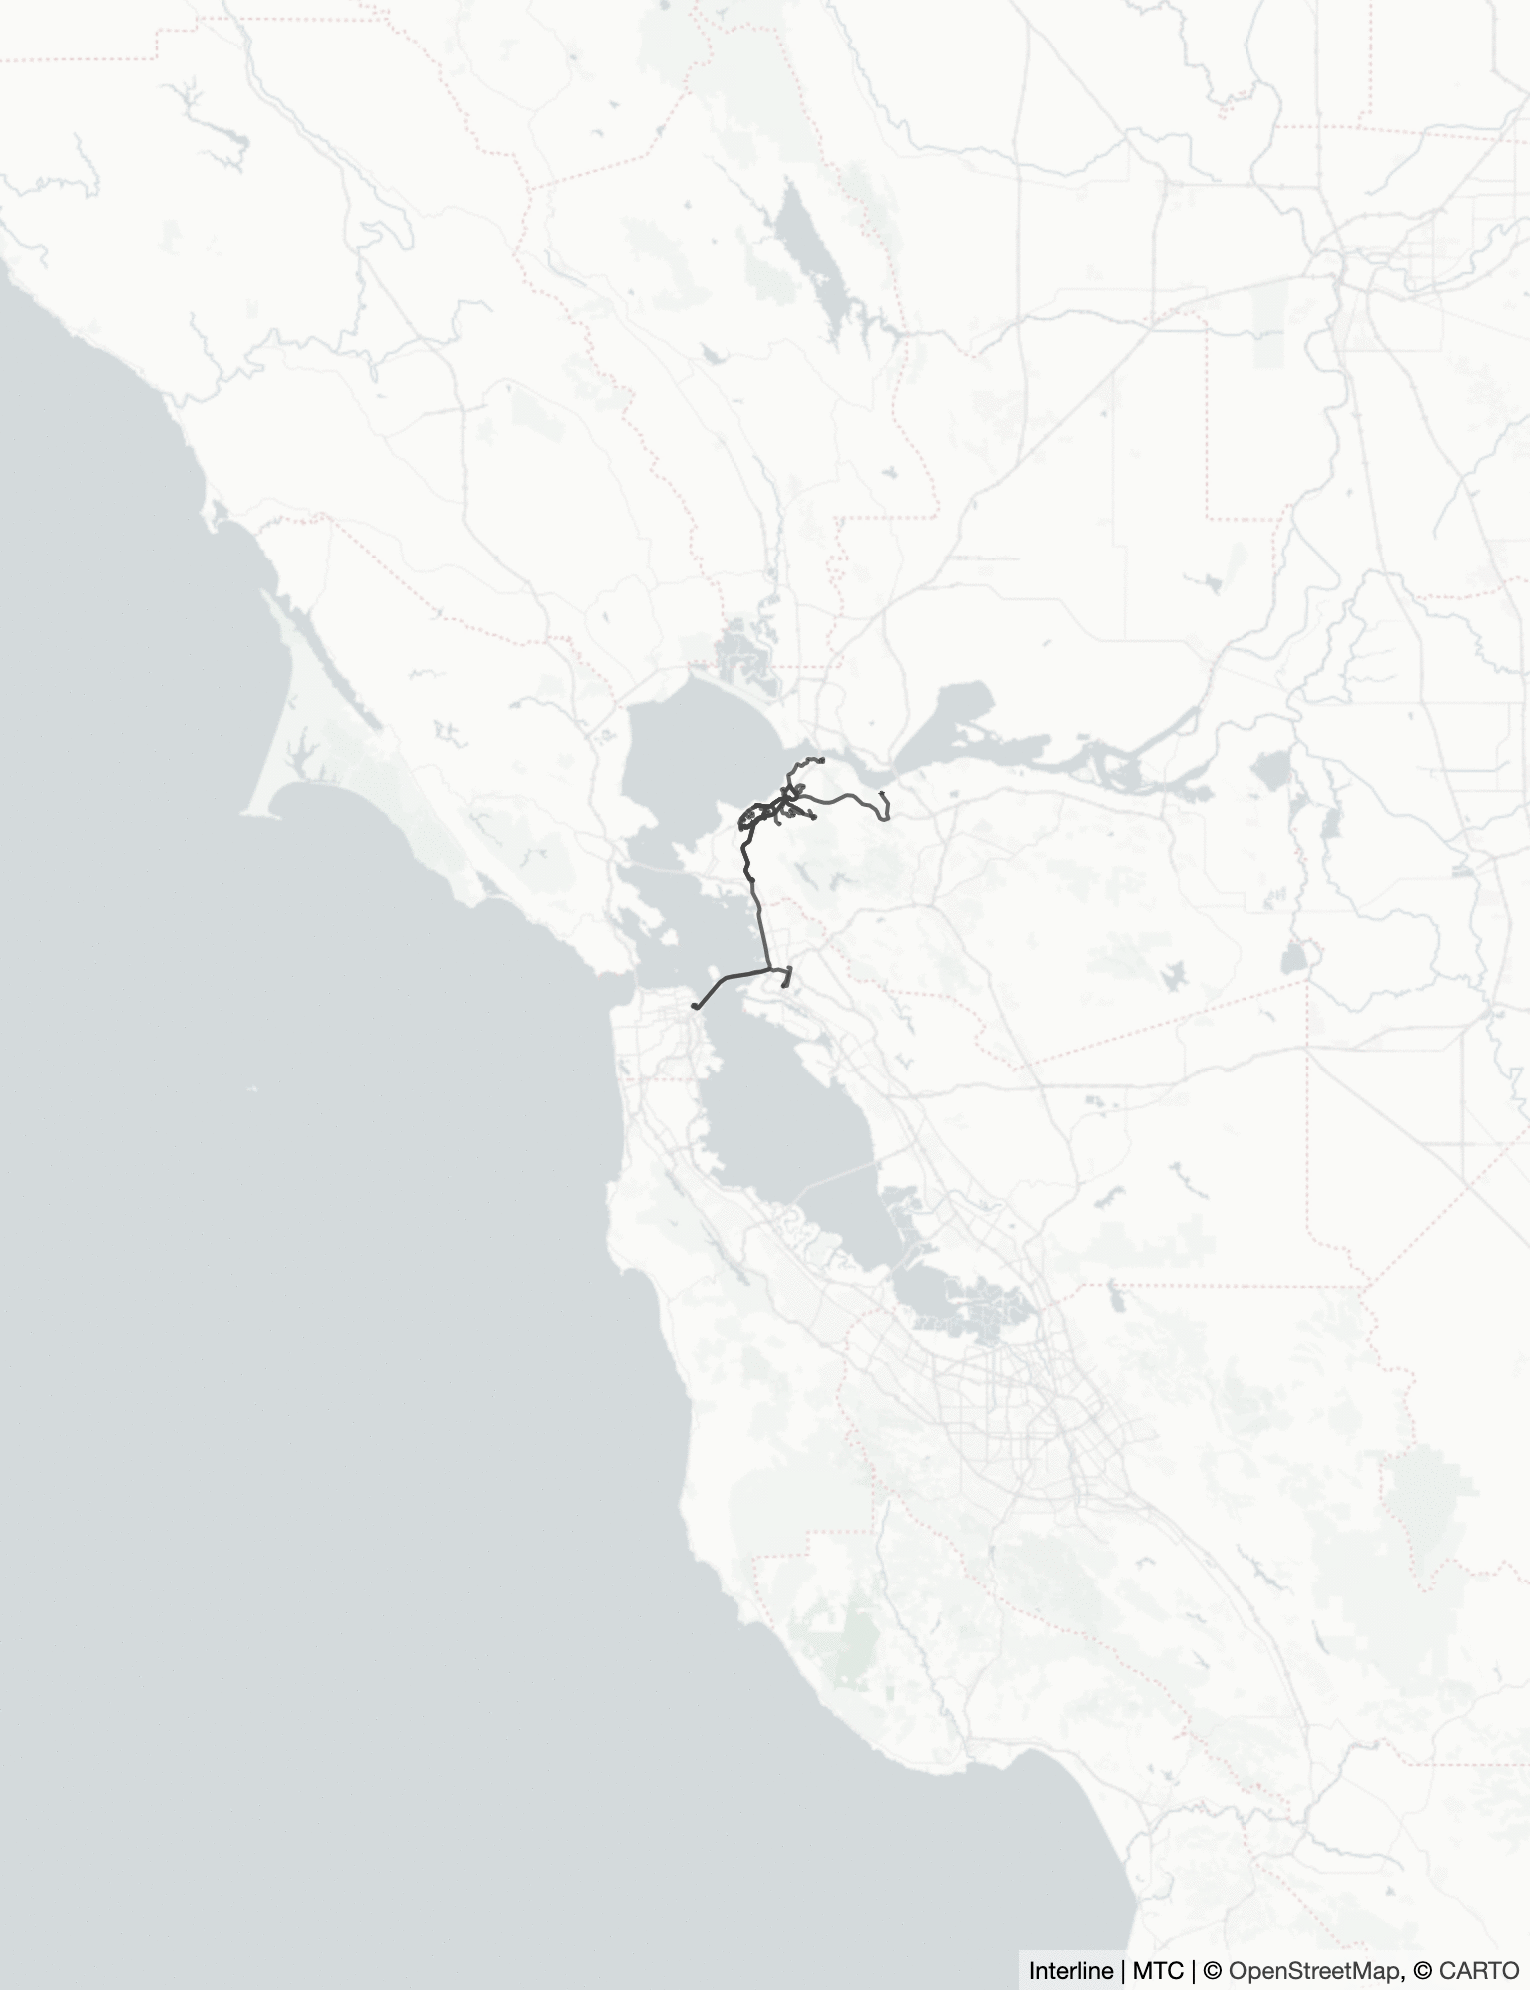 animated map of all transit routes in the Bay Area